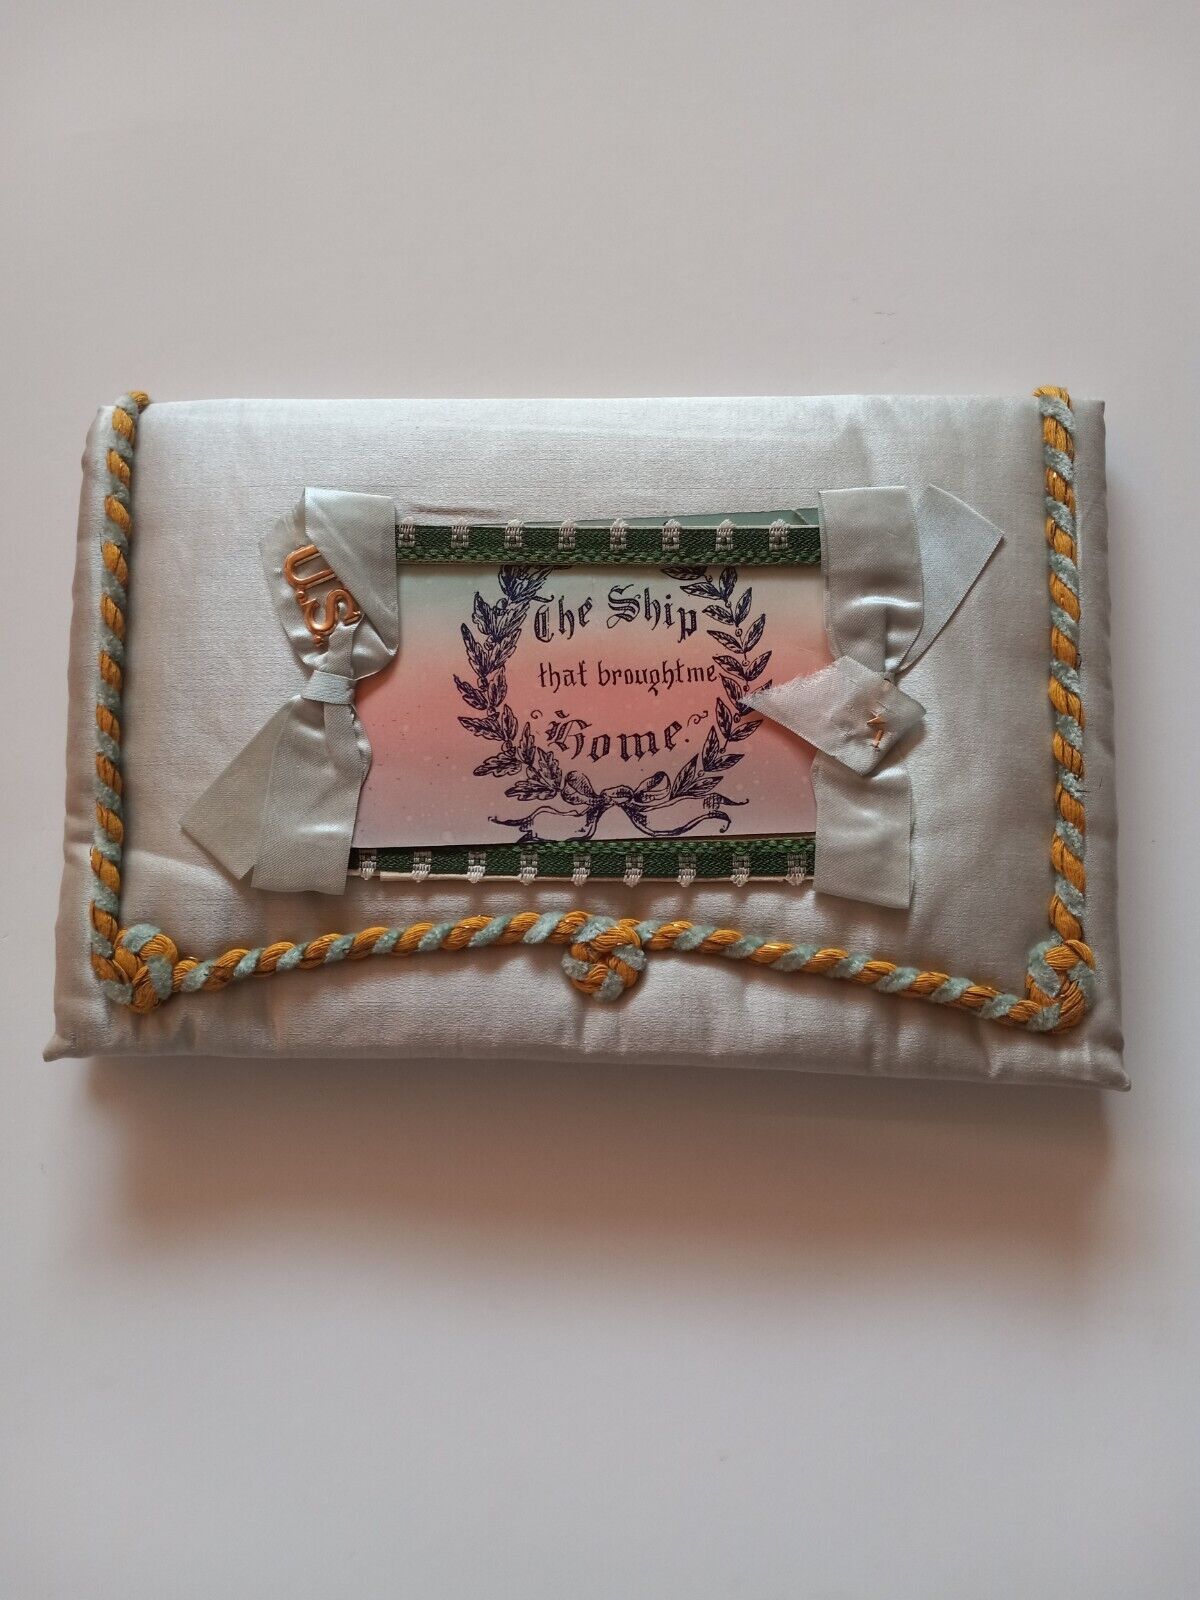 WWII U.S. ARMY SOLDIERS PERSONAL SATIN LETTER POUCH